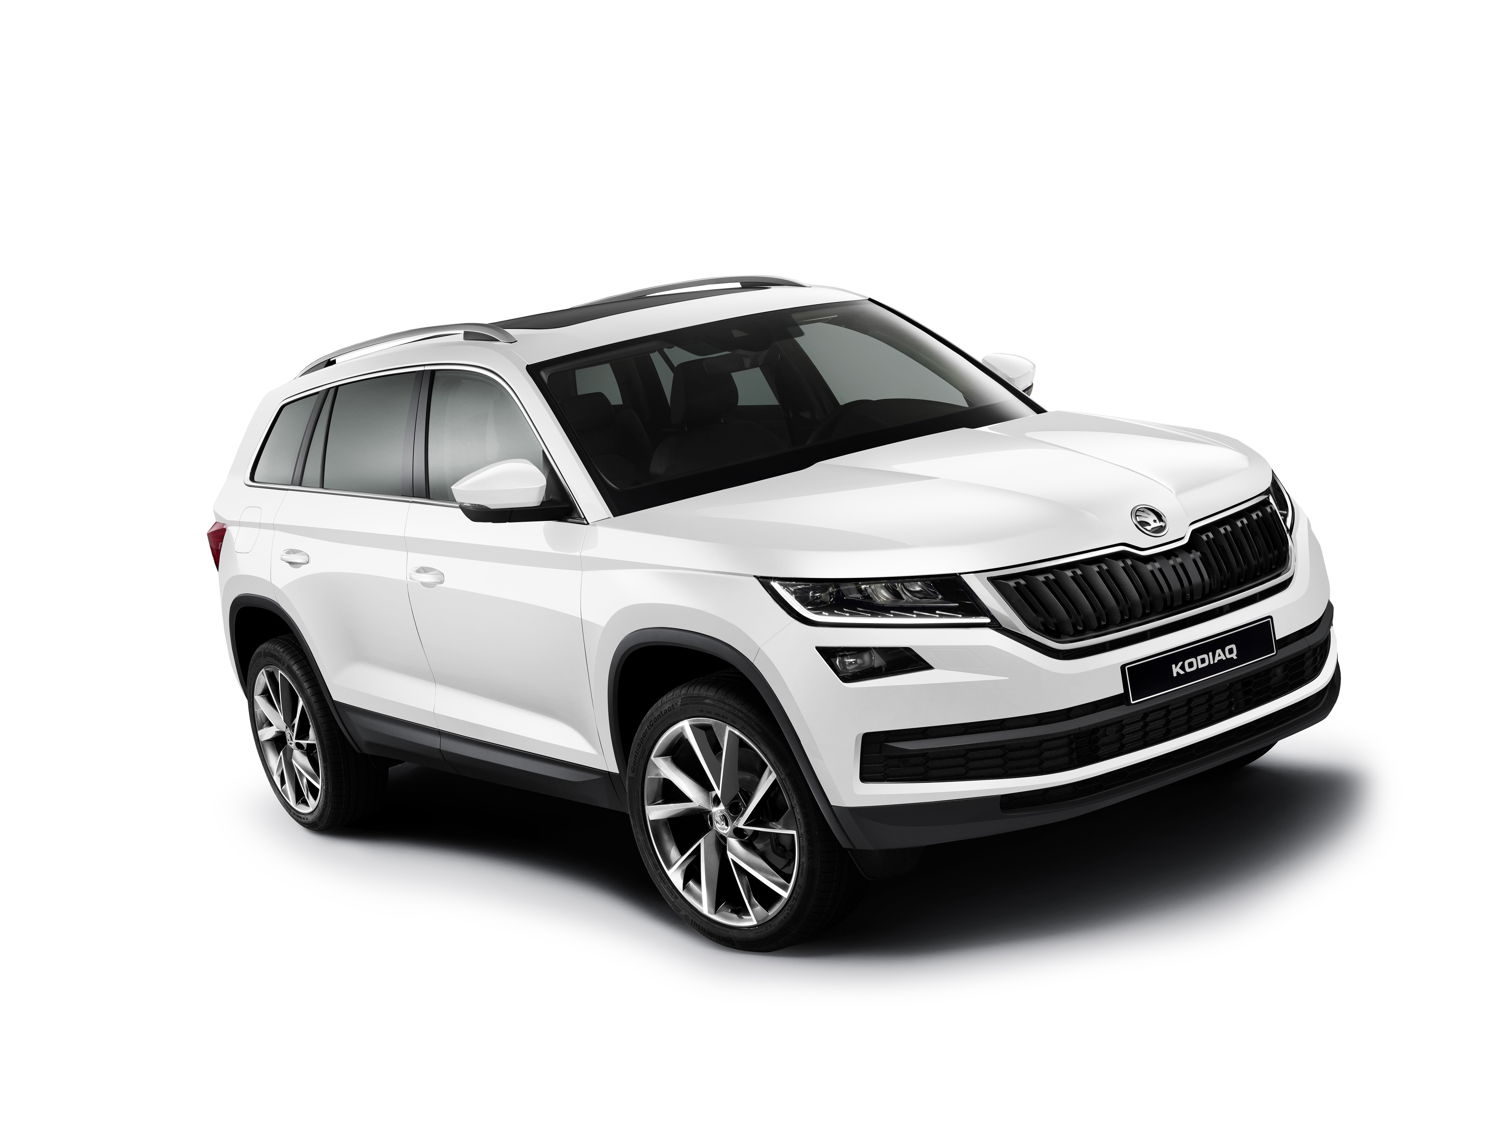 The Czech car manufacturer delivered 81,200 vehicles to customers worldwide in February; 3.1% more than in the same period last year (February 2016: 78,800). The February launch of the ŠKODA KODIAQ (photo) promises further growth momentum in 2017.